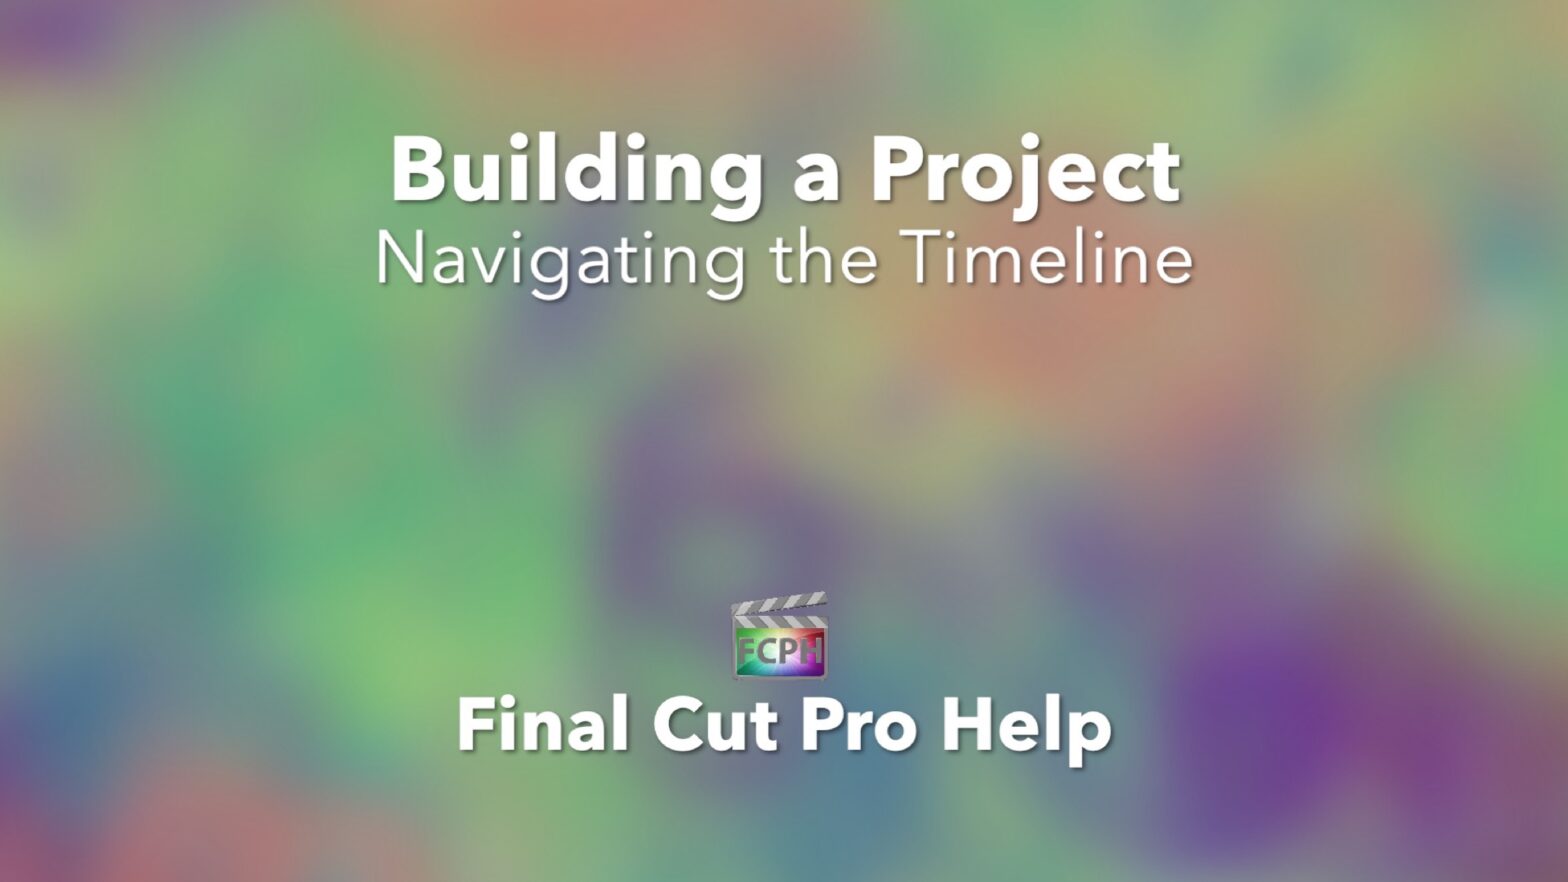 Building a Project Navigating the Timeline